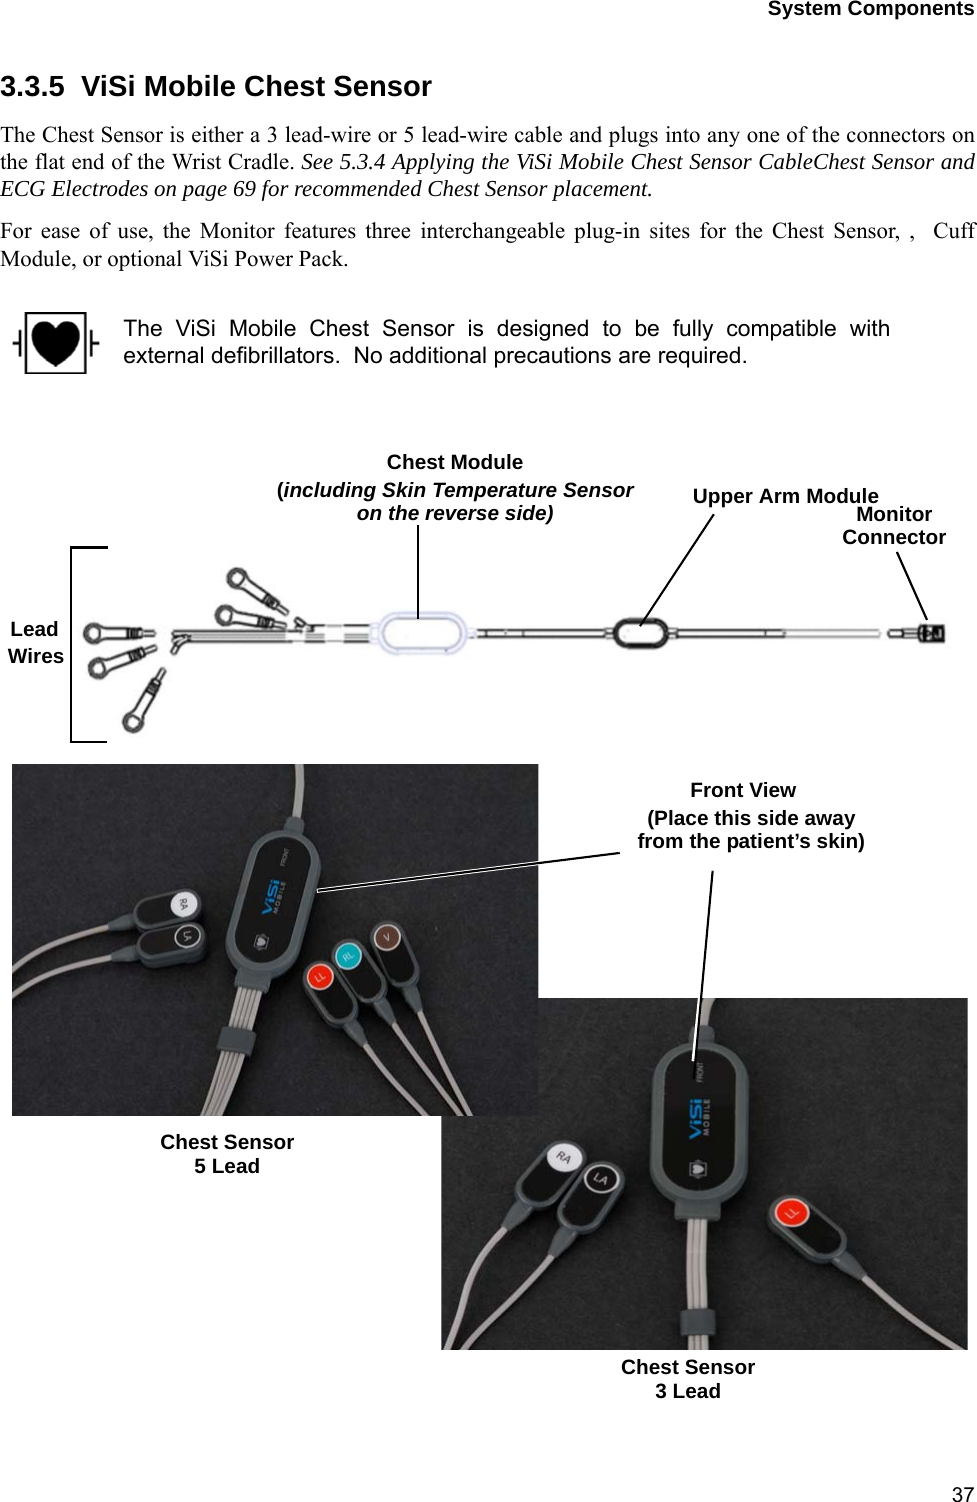 System Components373.3.5  ViSi Mobile Chest SensorThe Chest Sensor is either a 3 lead-wire or 5 lead-wire cable and plugs into any one of the connectors onthe flat end of the Wrist Cradle. See 5.3.4 Applying the ViSi Mobile Chest Sensor CableChest Sensor andECG Electrodes on page 69 for recommended Chest Sensor placement.For ease of use, the Monitor features three interchangeable plug-in sites for the Chest Sensor, ,  CuffModule, or optional ViSi Power Pack.The ViSi Mobile Chest Sensor is designed to be fully compatible withexternal defibrillators.  No additional precautions are required.Upper Arm ModuleChest ModuleLead(including Skin Temperature Sensor MonitorConnectoron the reverse side)WiresChest Sensor5 LeadChest Sensor3 LeadFront View(Place this side awayfrom the patient’s skin)